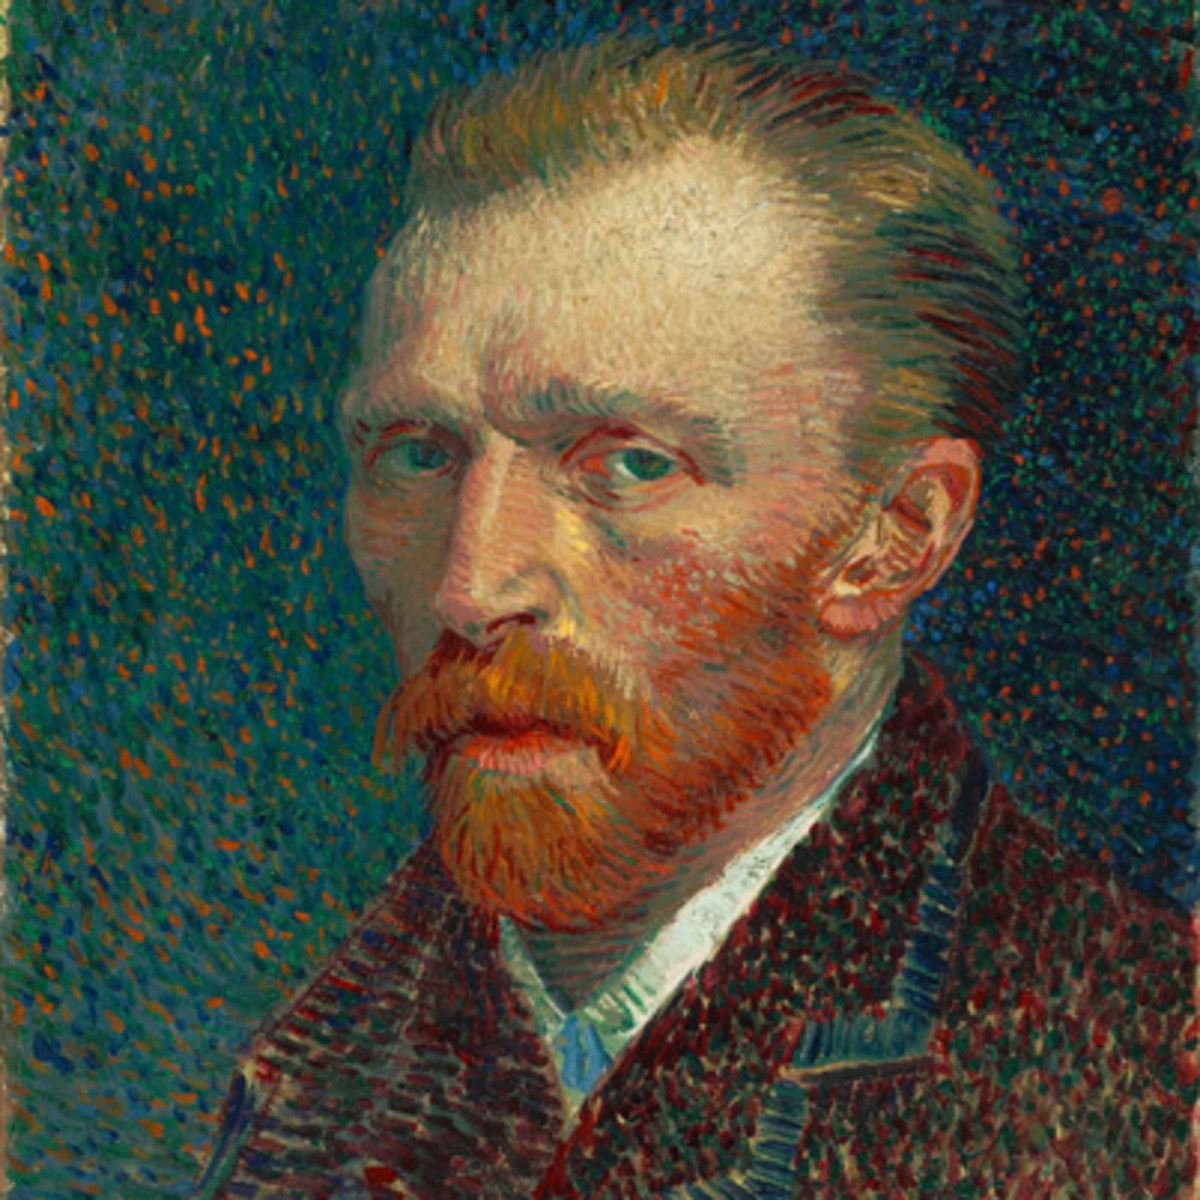 Many People Told Me This Mixed Trivia Quiz Was “Too Difficult”, Let’s See If They Were Right Vincent van Gogh